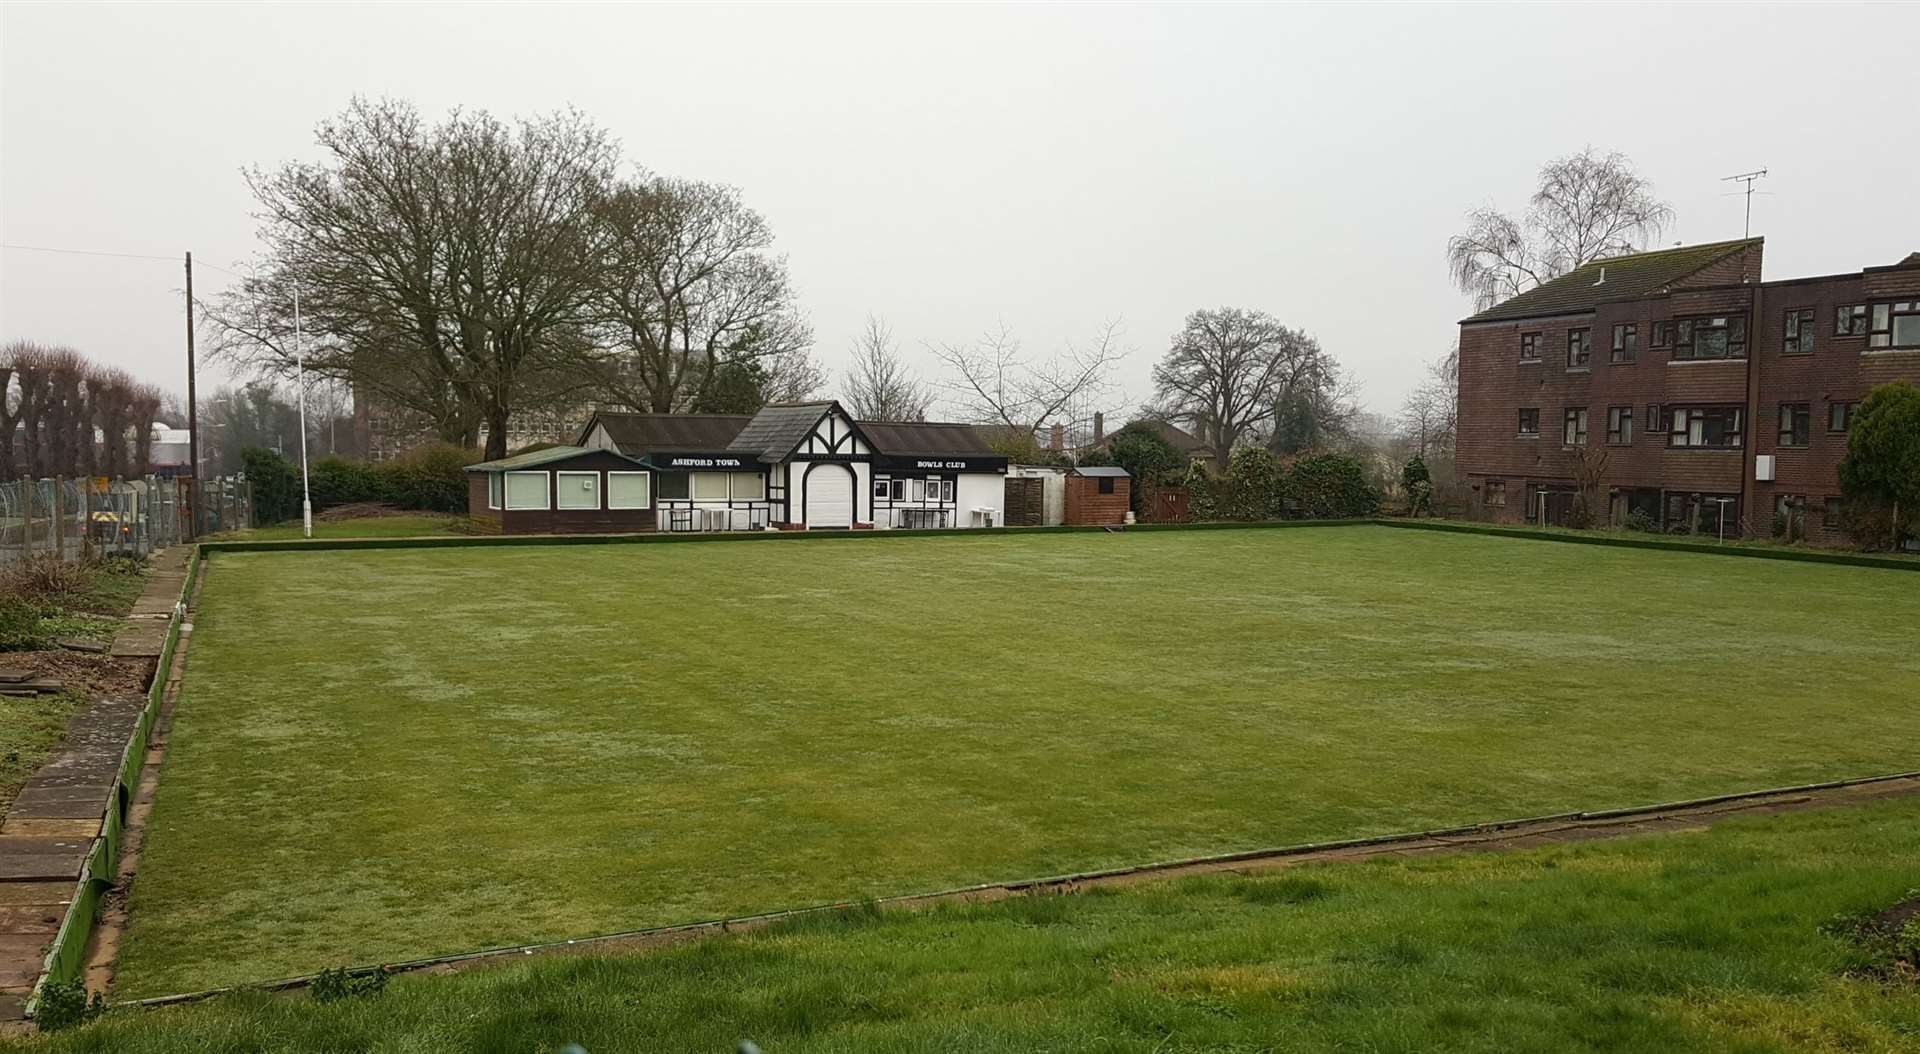 The current location of Ashford Town Bowls Club in Vicarage Lane